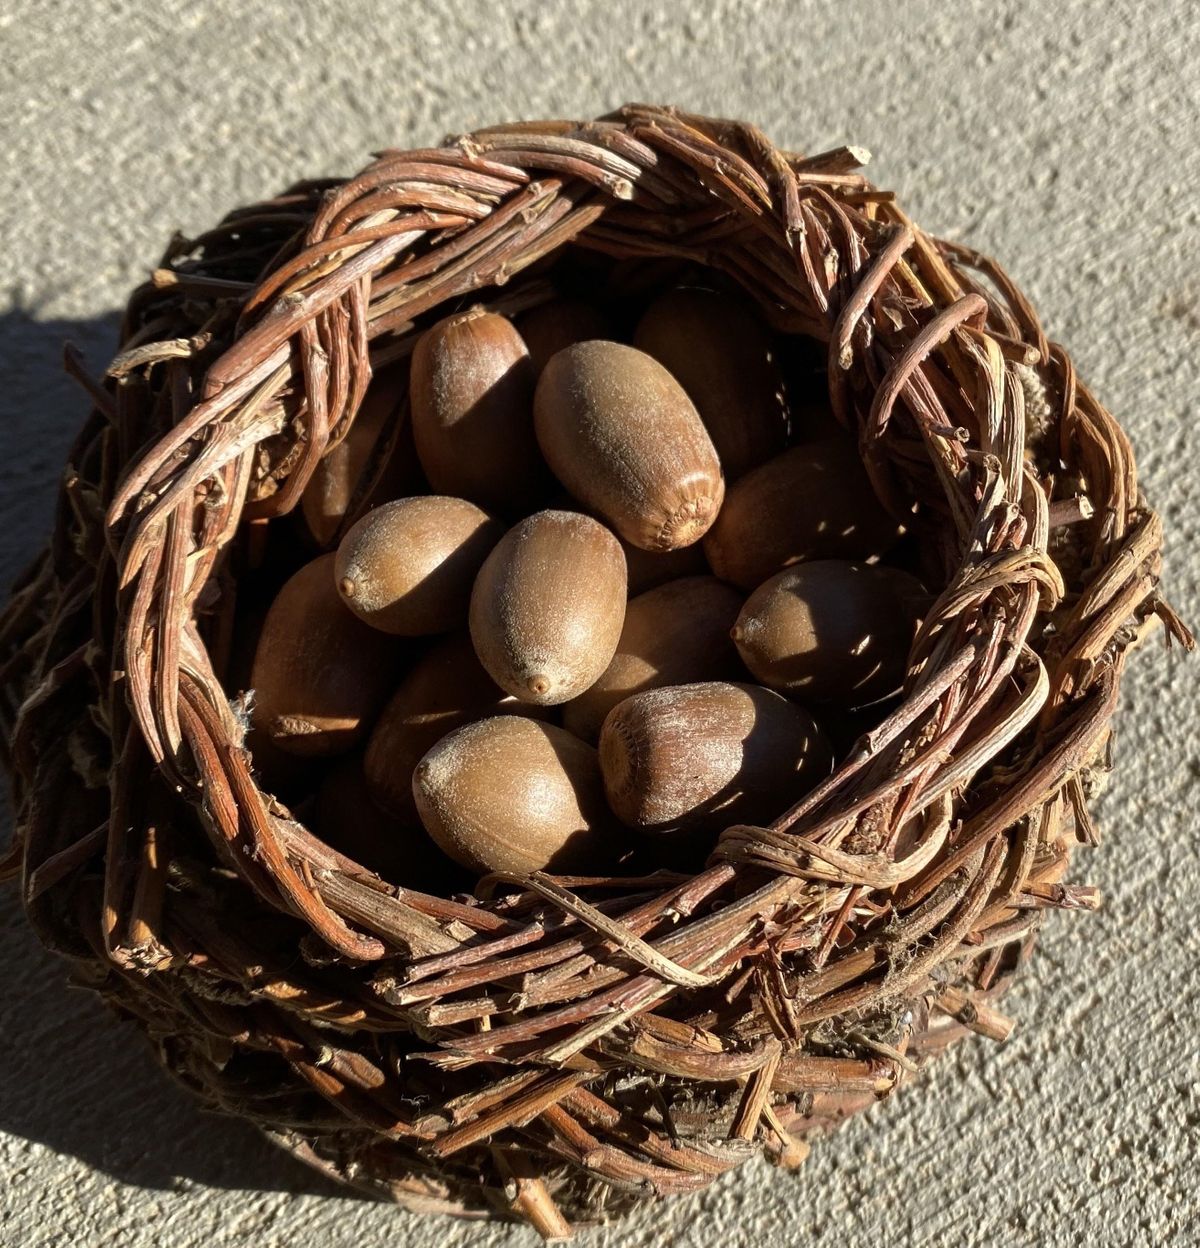 Wewish Class: A  Traditional Cahuilla Food Dish Made From Black Acorns